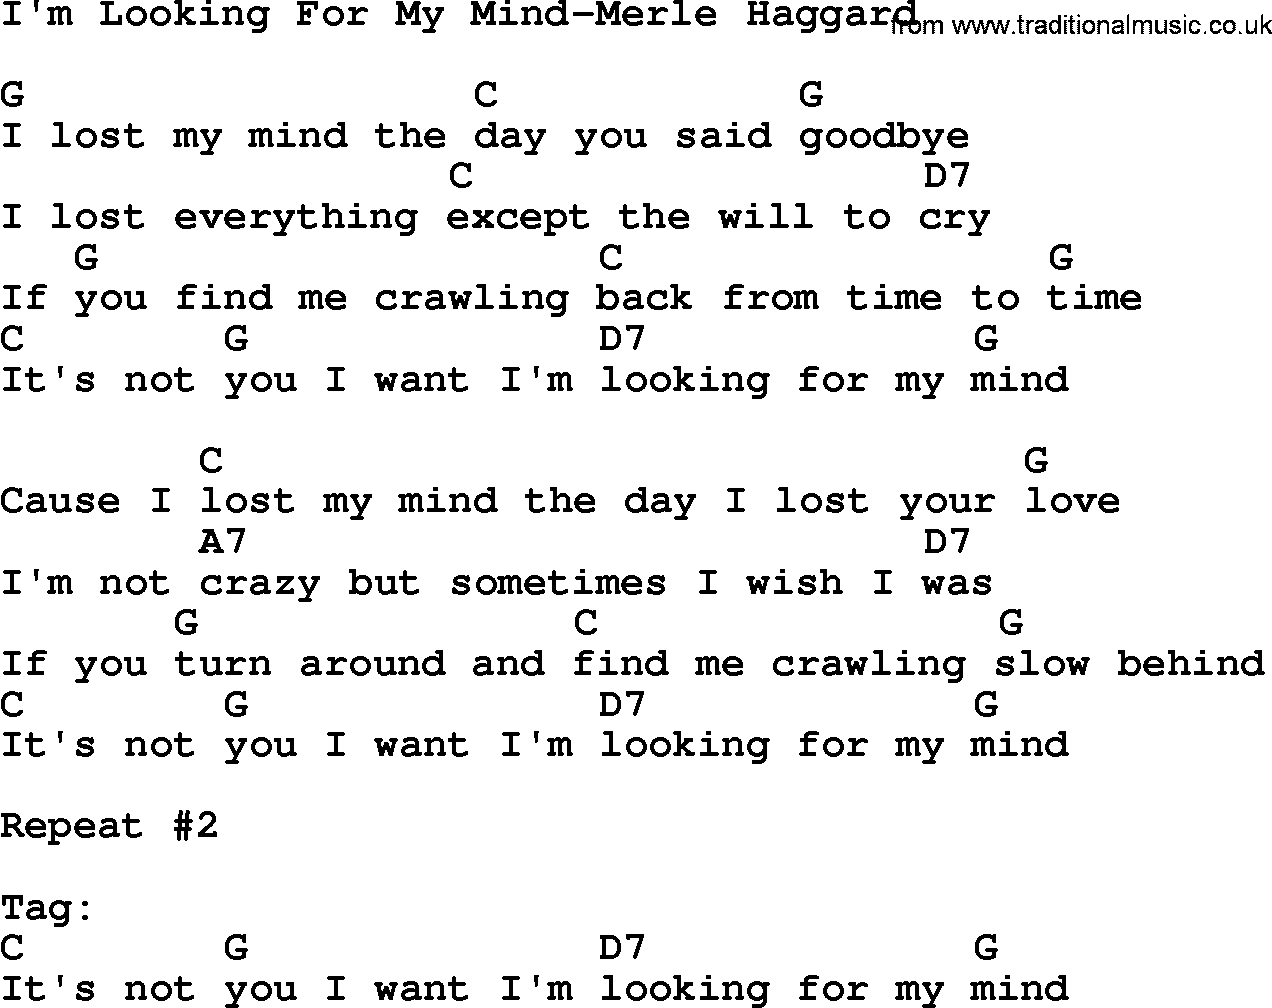 Country music song: I'm Looking For My Mind-Merle Haggard lyrics and chords